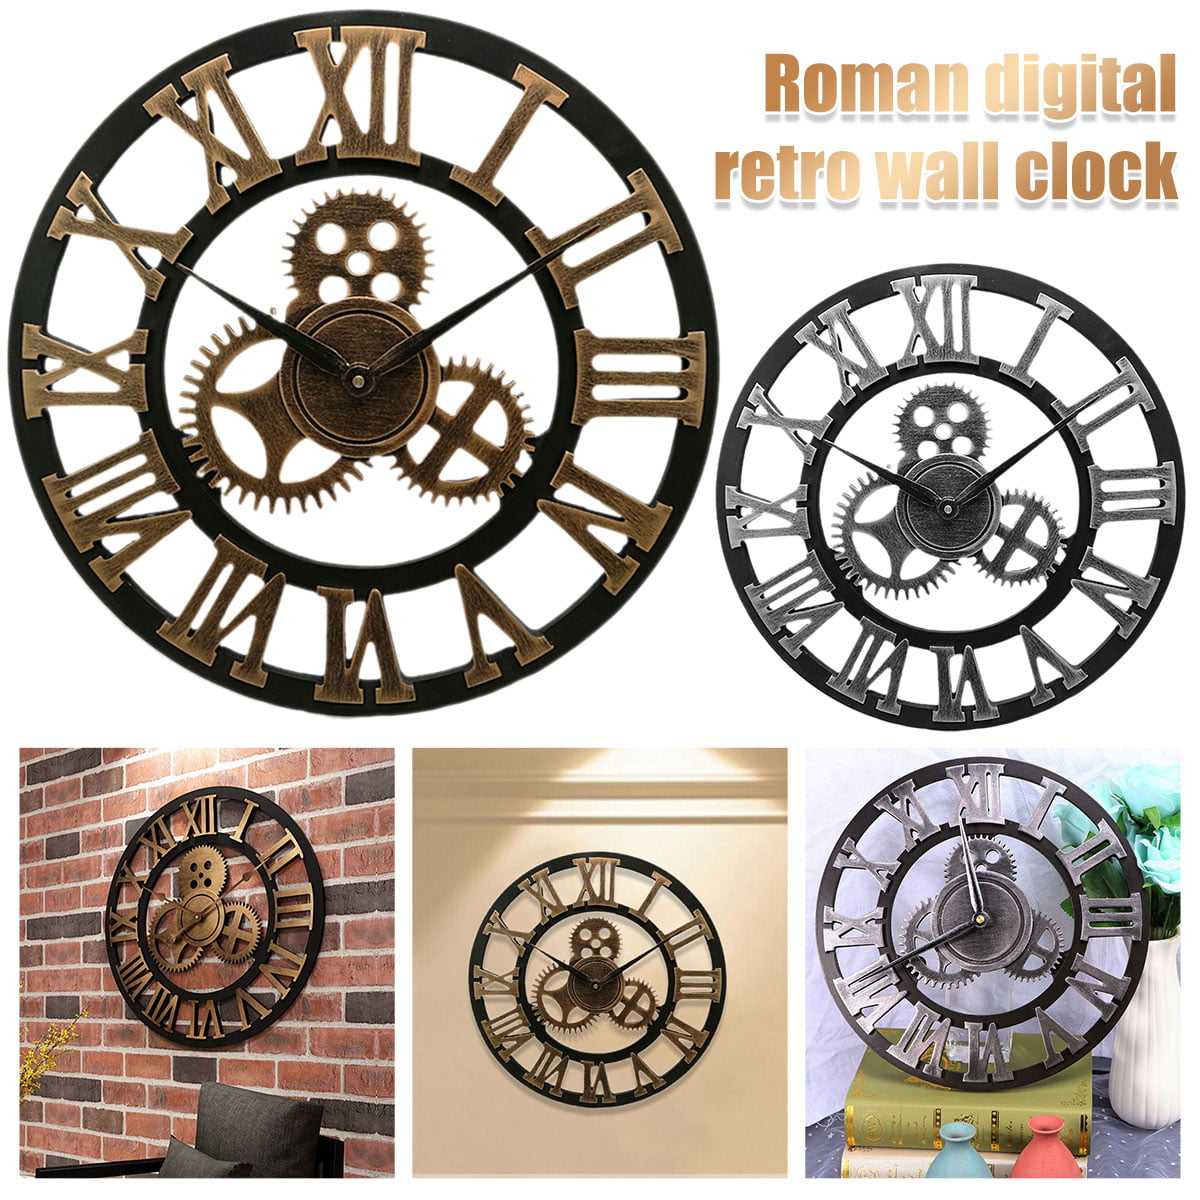 3D Gear Wooden Wall Clock Vintage Retro Roman Numerals Silent Sweep Non-ticking 